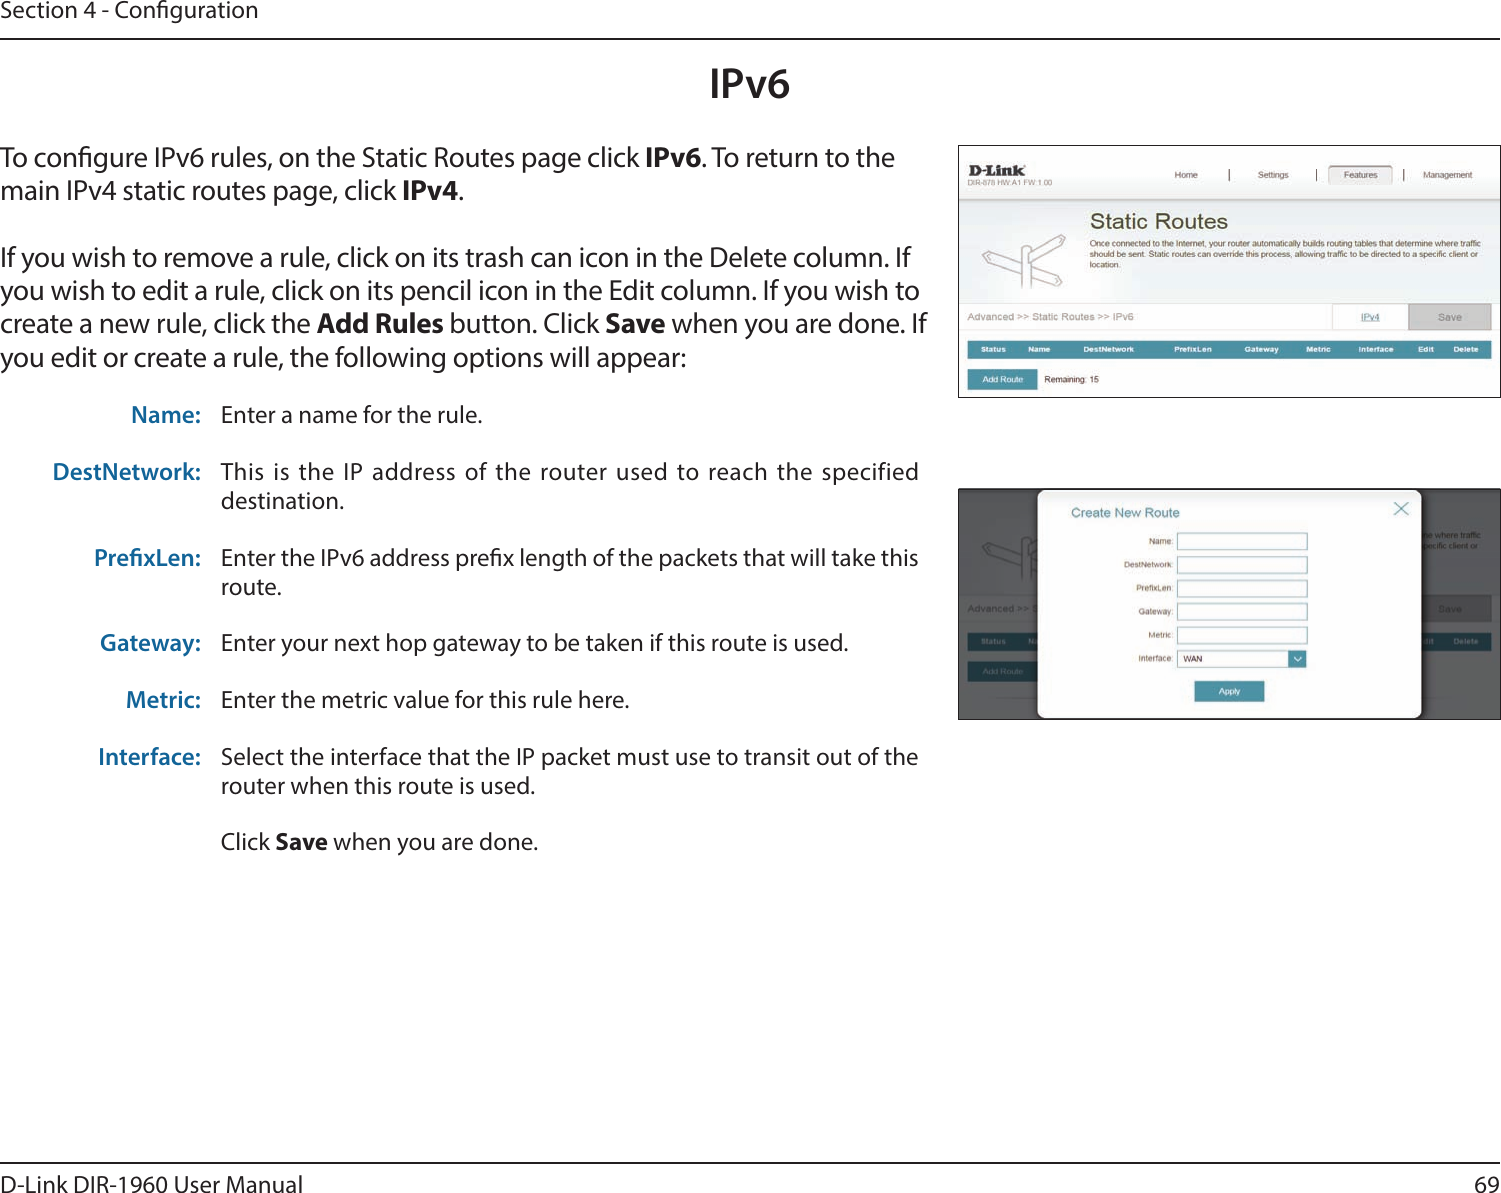 69D-Link DIR-1960 User ManualSection 4 - CongurationIPv6To congure IPv6 rules, on the Static Routes page click IPv6. To return to the main IPv4 static routes page, click IPv4.If you wish to remove a rule, click on its trash can icon in the Delete column. If you wish to edit a rule, click on its pencil icon in the Edit column. If you wish to create a new rule, click the Add Rules button. Click Save when you are done. If you edit or create a rule, the following options will appear:Name: Enter a name for the rule.DestNetwork: This is the IP address of the router used to reach the specified destination.PrexLen: Enter the IPv6 address prex length of the packets that will take this route. Gateway: Enter your next hop gateway to be taken if this route is used.Metric: Enter the metric value for this rule here.Interface: Select the interface that the IP packet must use to transit out of the router when this route is used.Click Save when you are done.